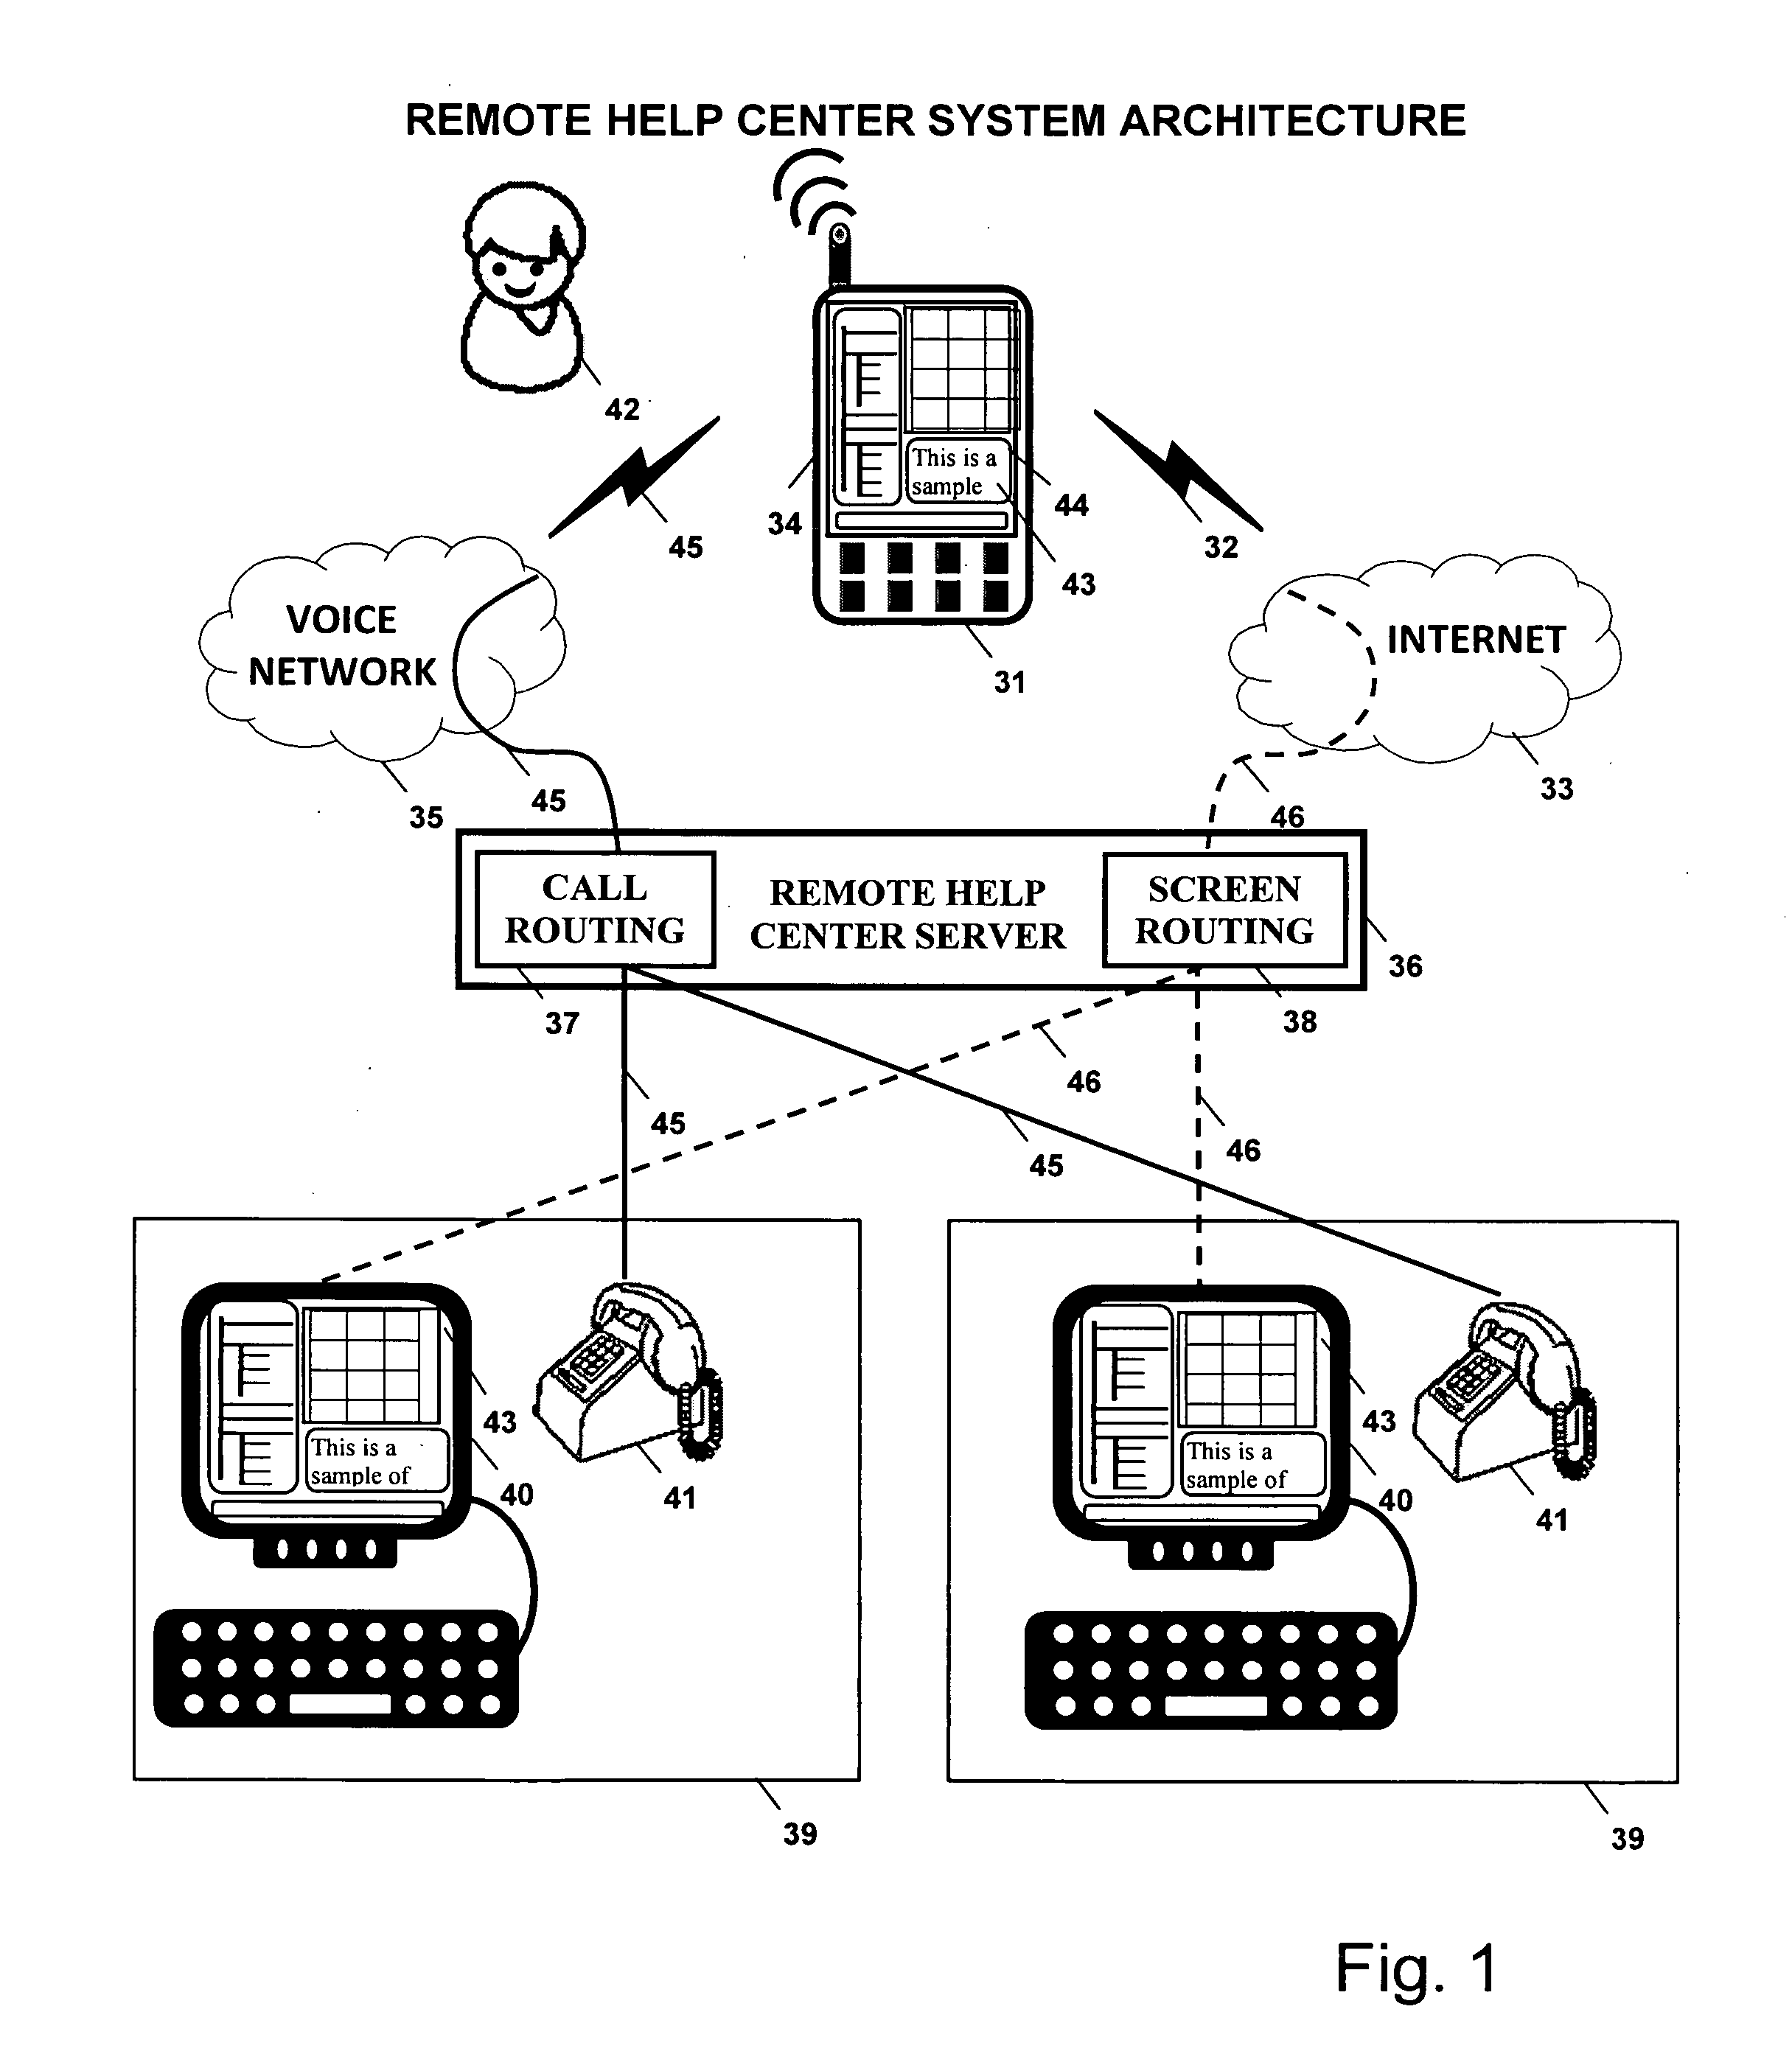 Assisted application operation service for mobile devices using screen sharing